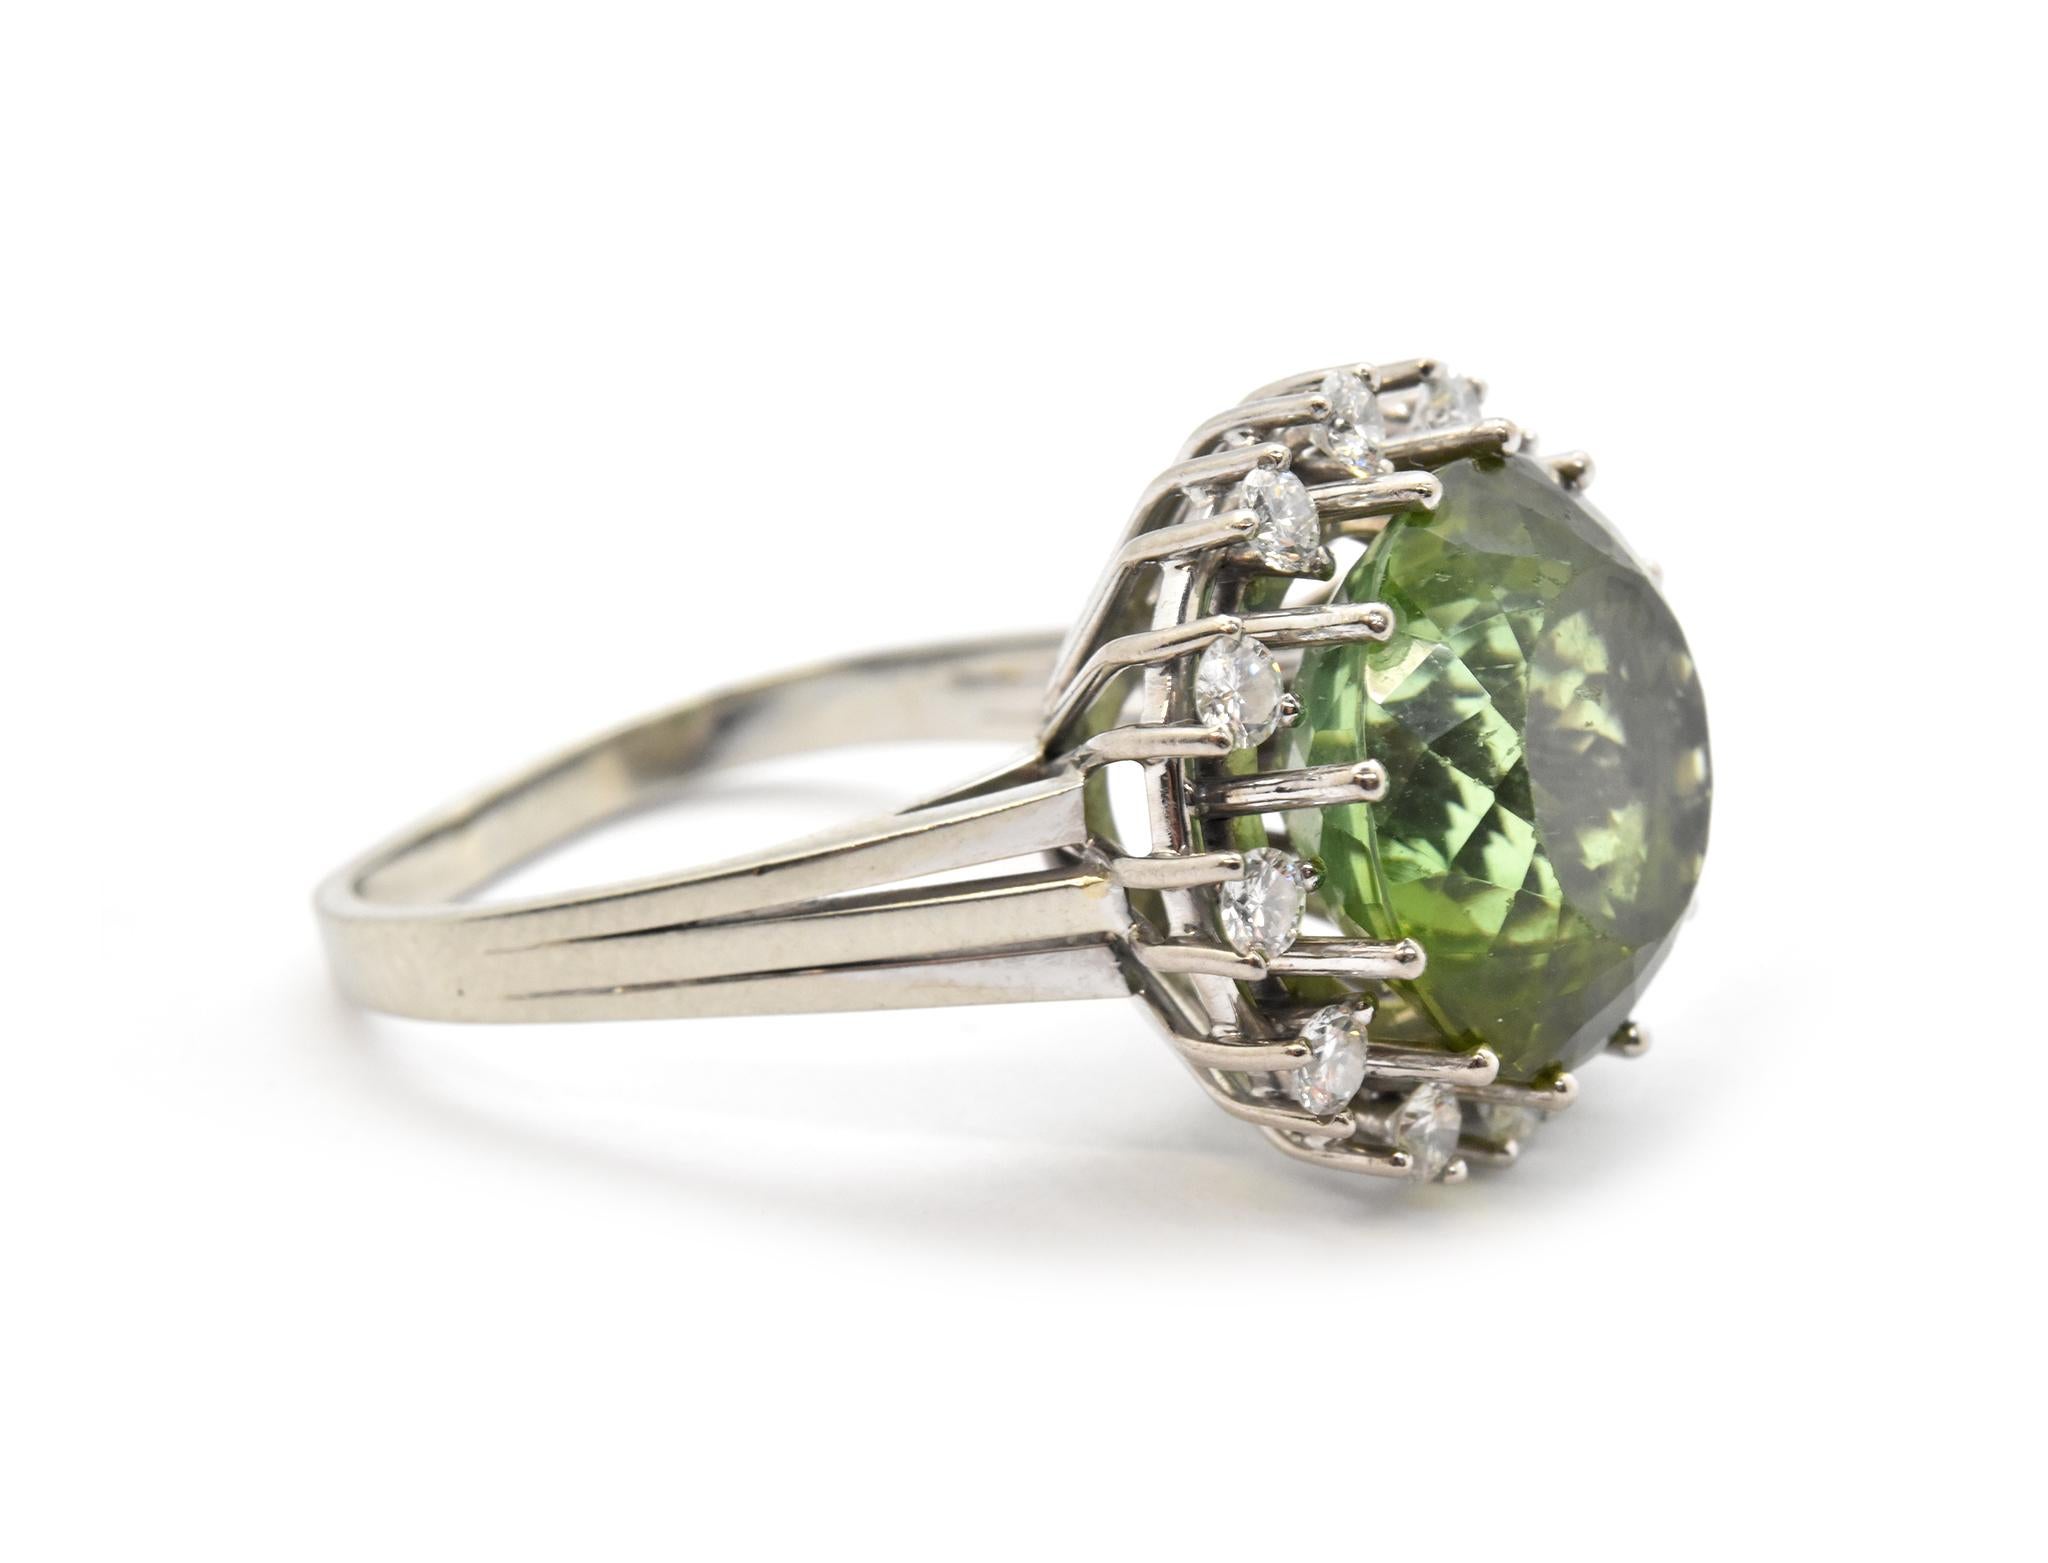 This stunning cocktail ring holds a fabulous green tourmaline at its center. The tourmaline weighs 9.87 carats, and it is surrounded by a halo of sparkling diamonds. The diamonds have an additional weight of 0.60ct total. The ring measures 18mm